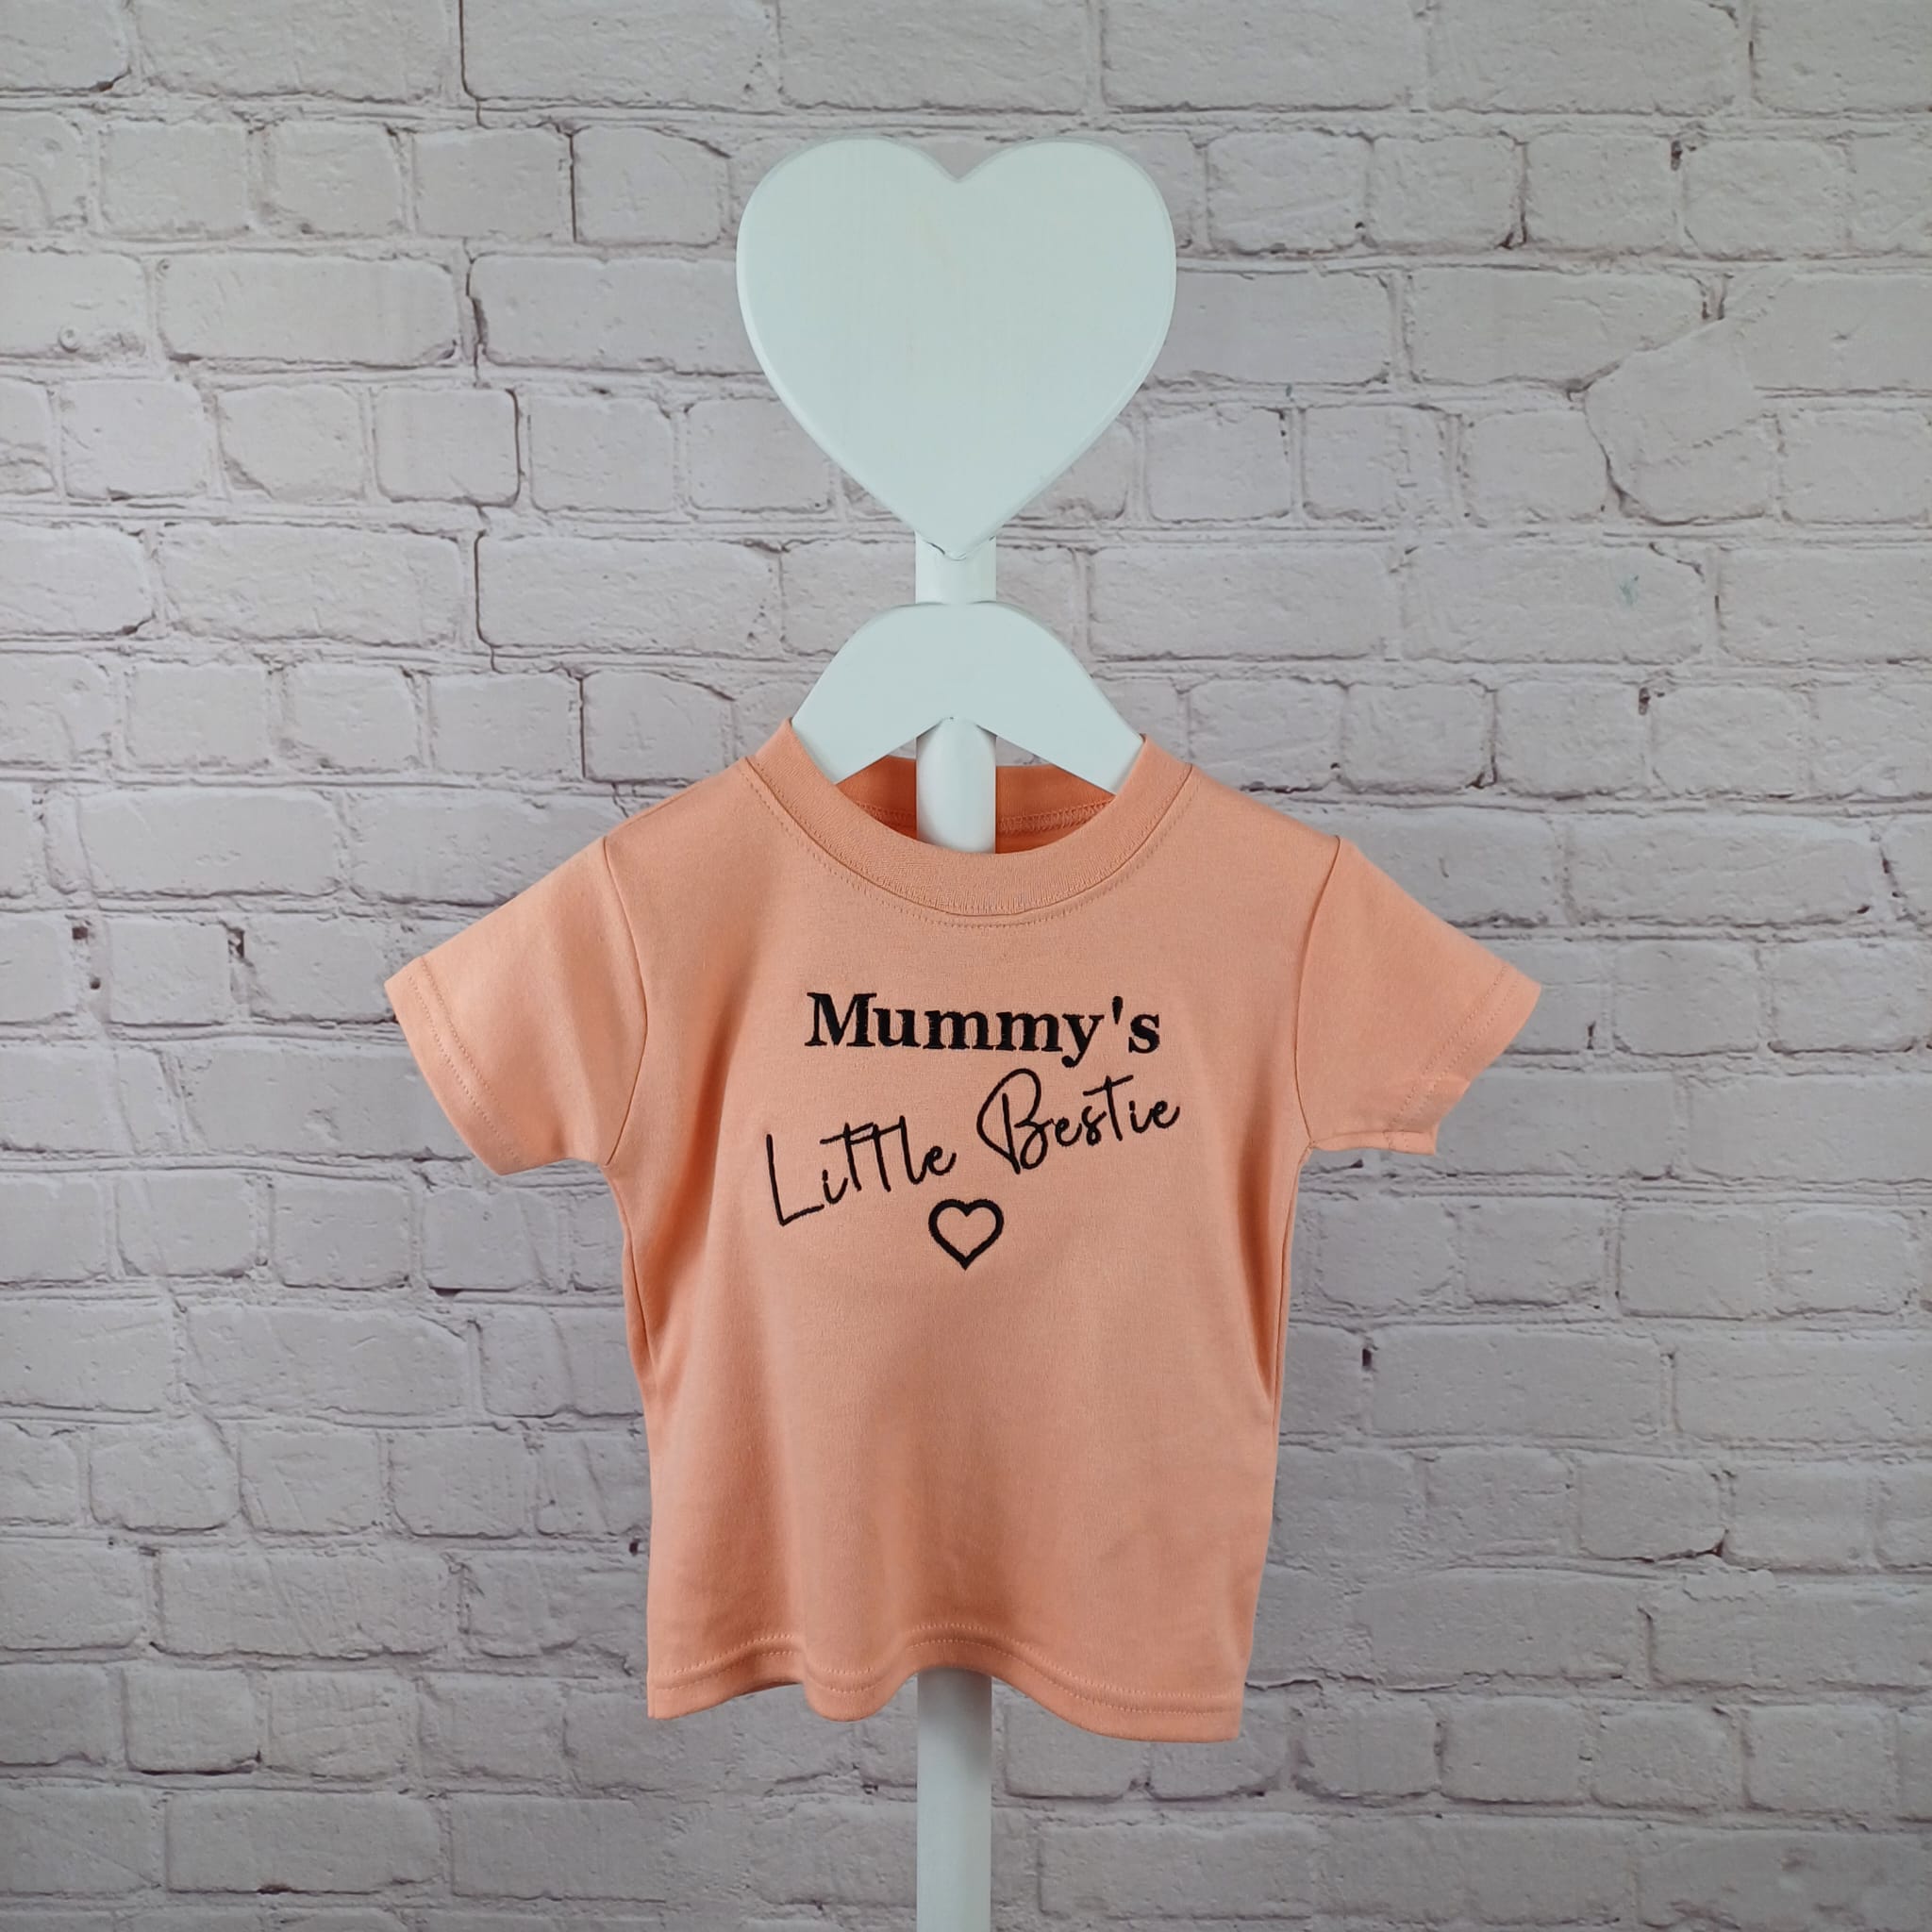 Bestie T-Shirt for children, ideal first birthday t shirt, mothers day gift or birthday gift. personalised and embroidered